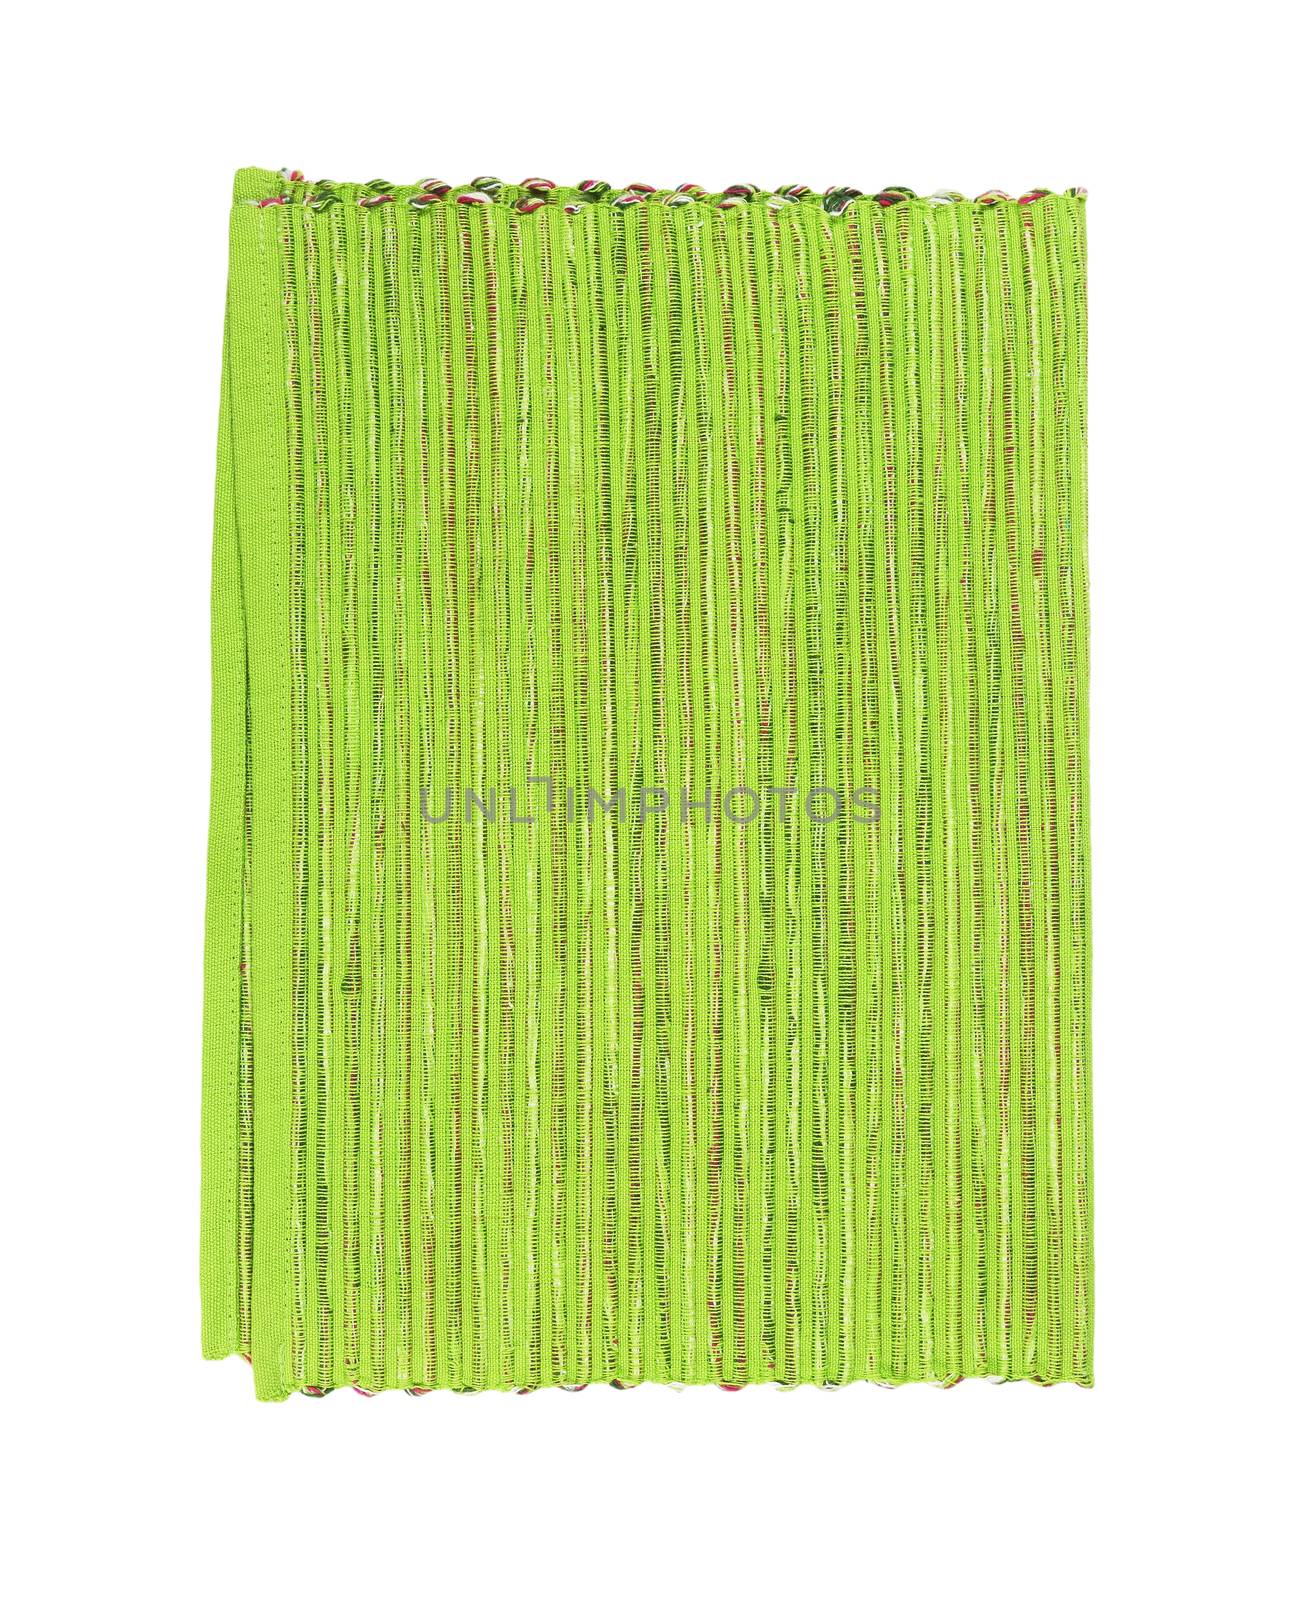 Ribbed green placemat folded in half isolated on white